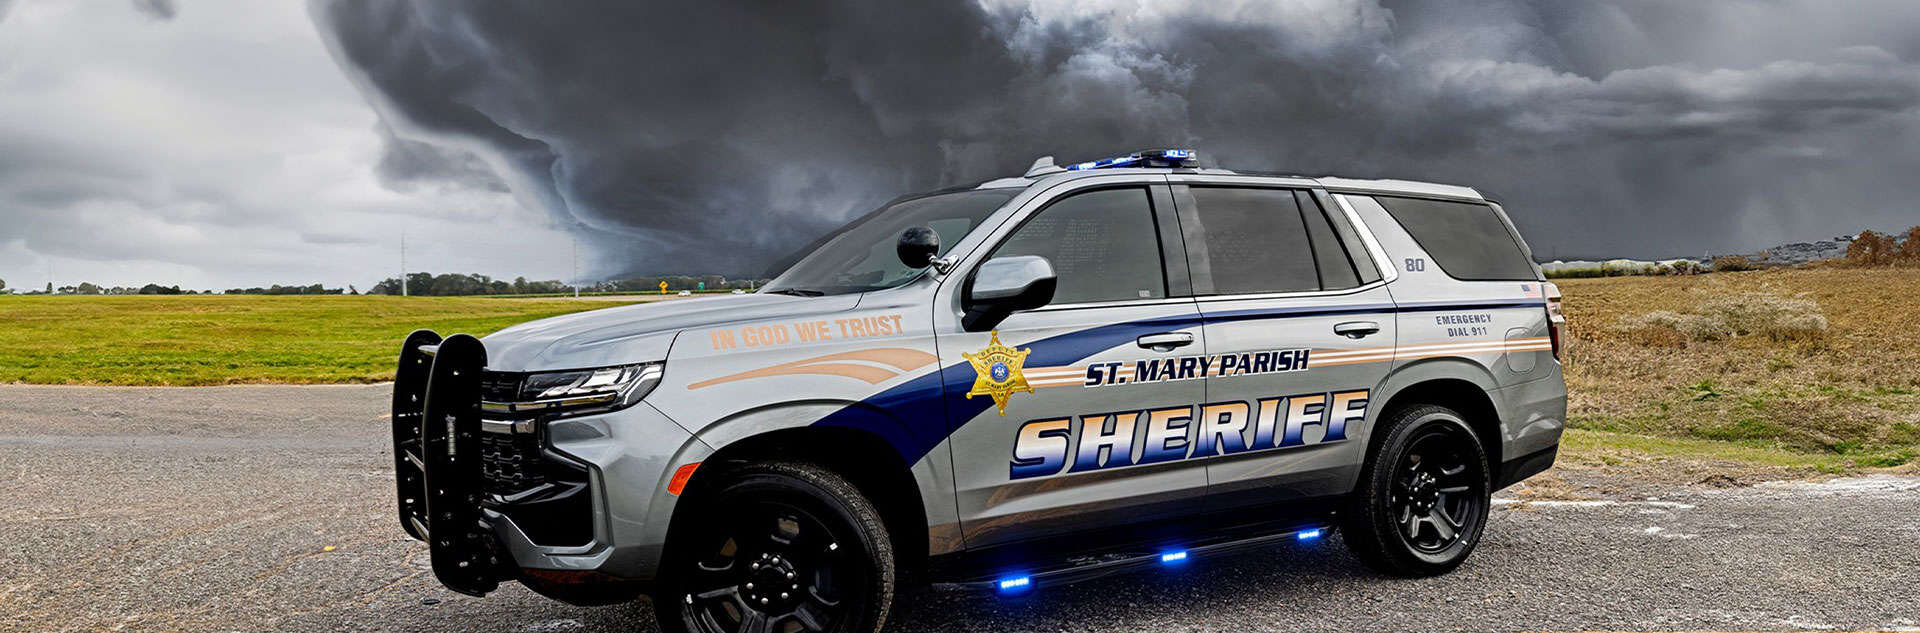 Sheriff patrol SUV in front of a dark thunderstorm cloud.